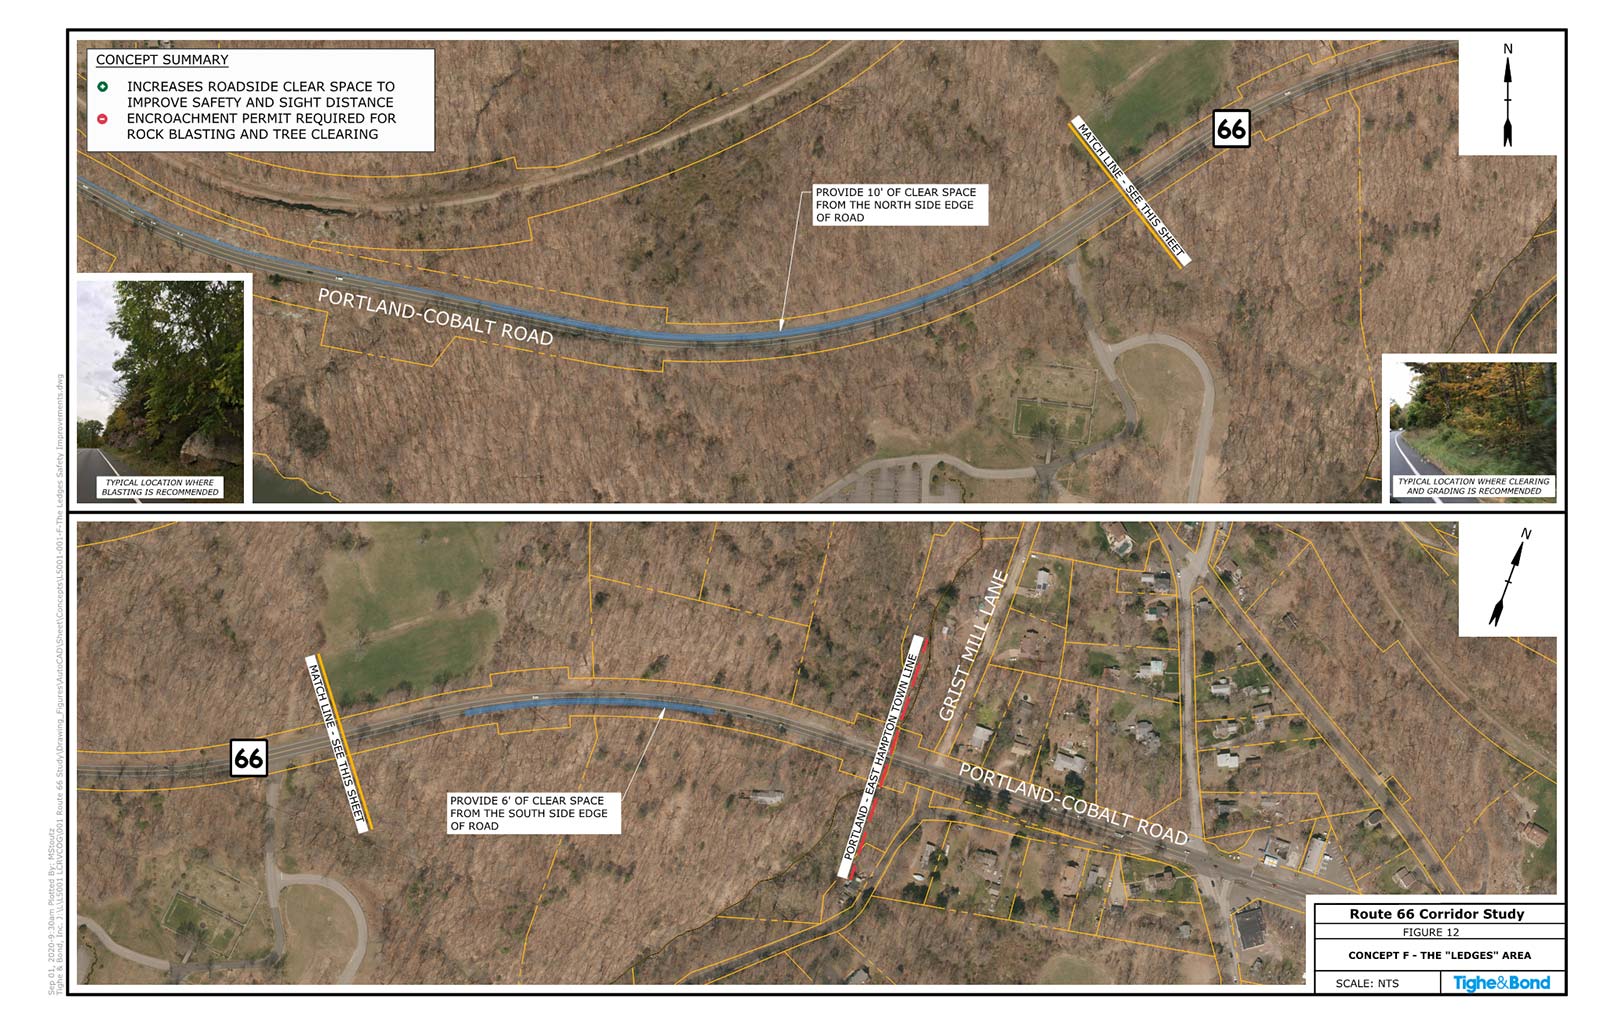 Route 66 at Portland Ledges Area Safety Improvements (Concept F). Route 66 Transportation Study, Portland and East Hampton, CT.